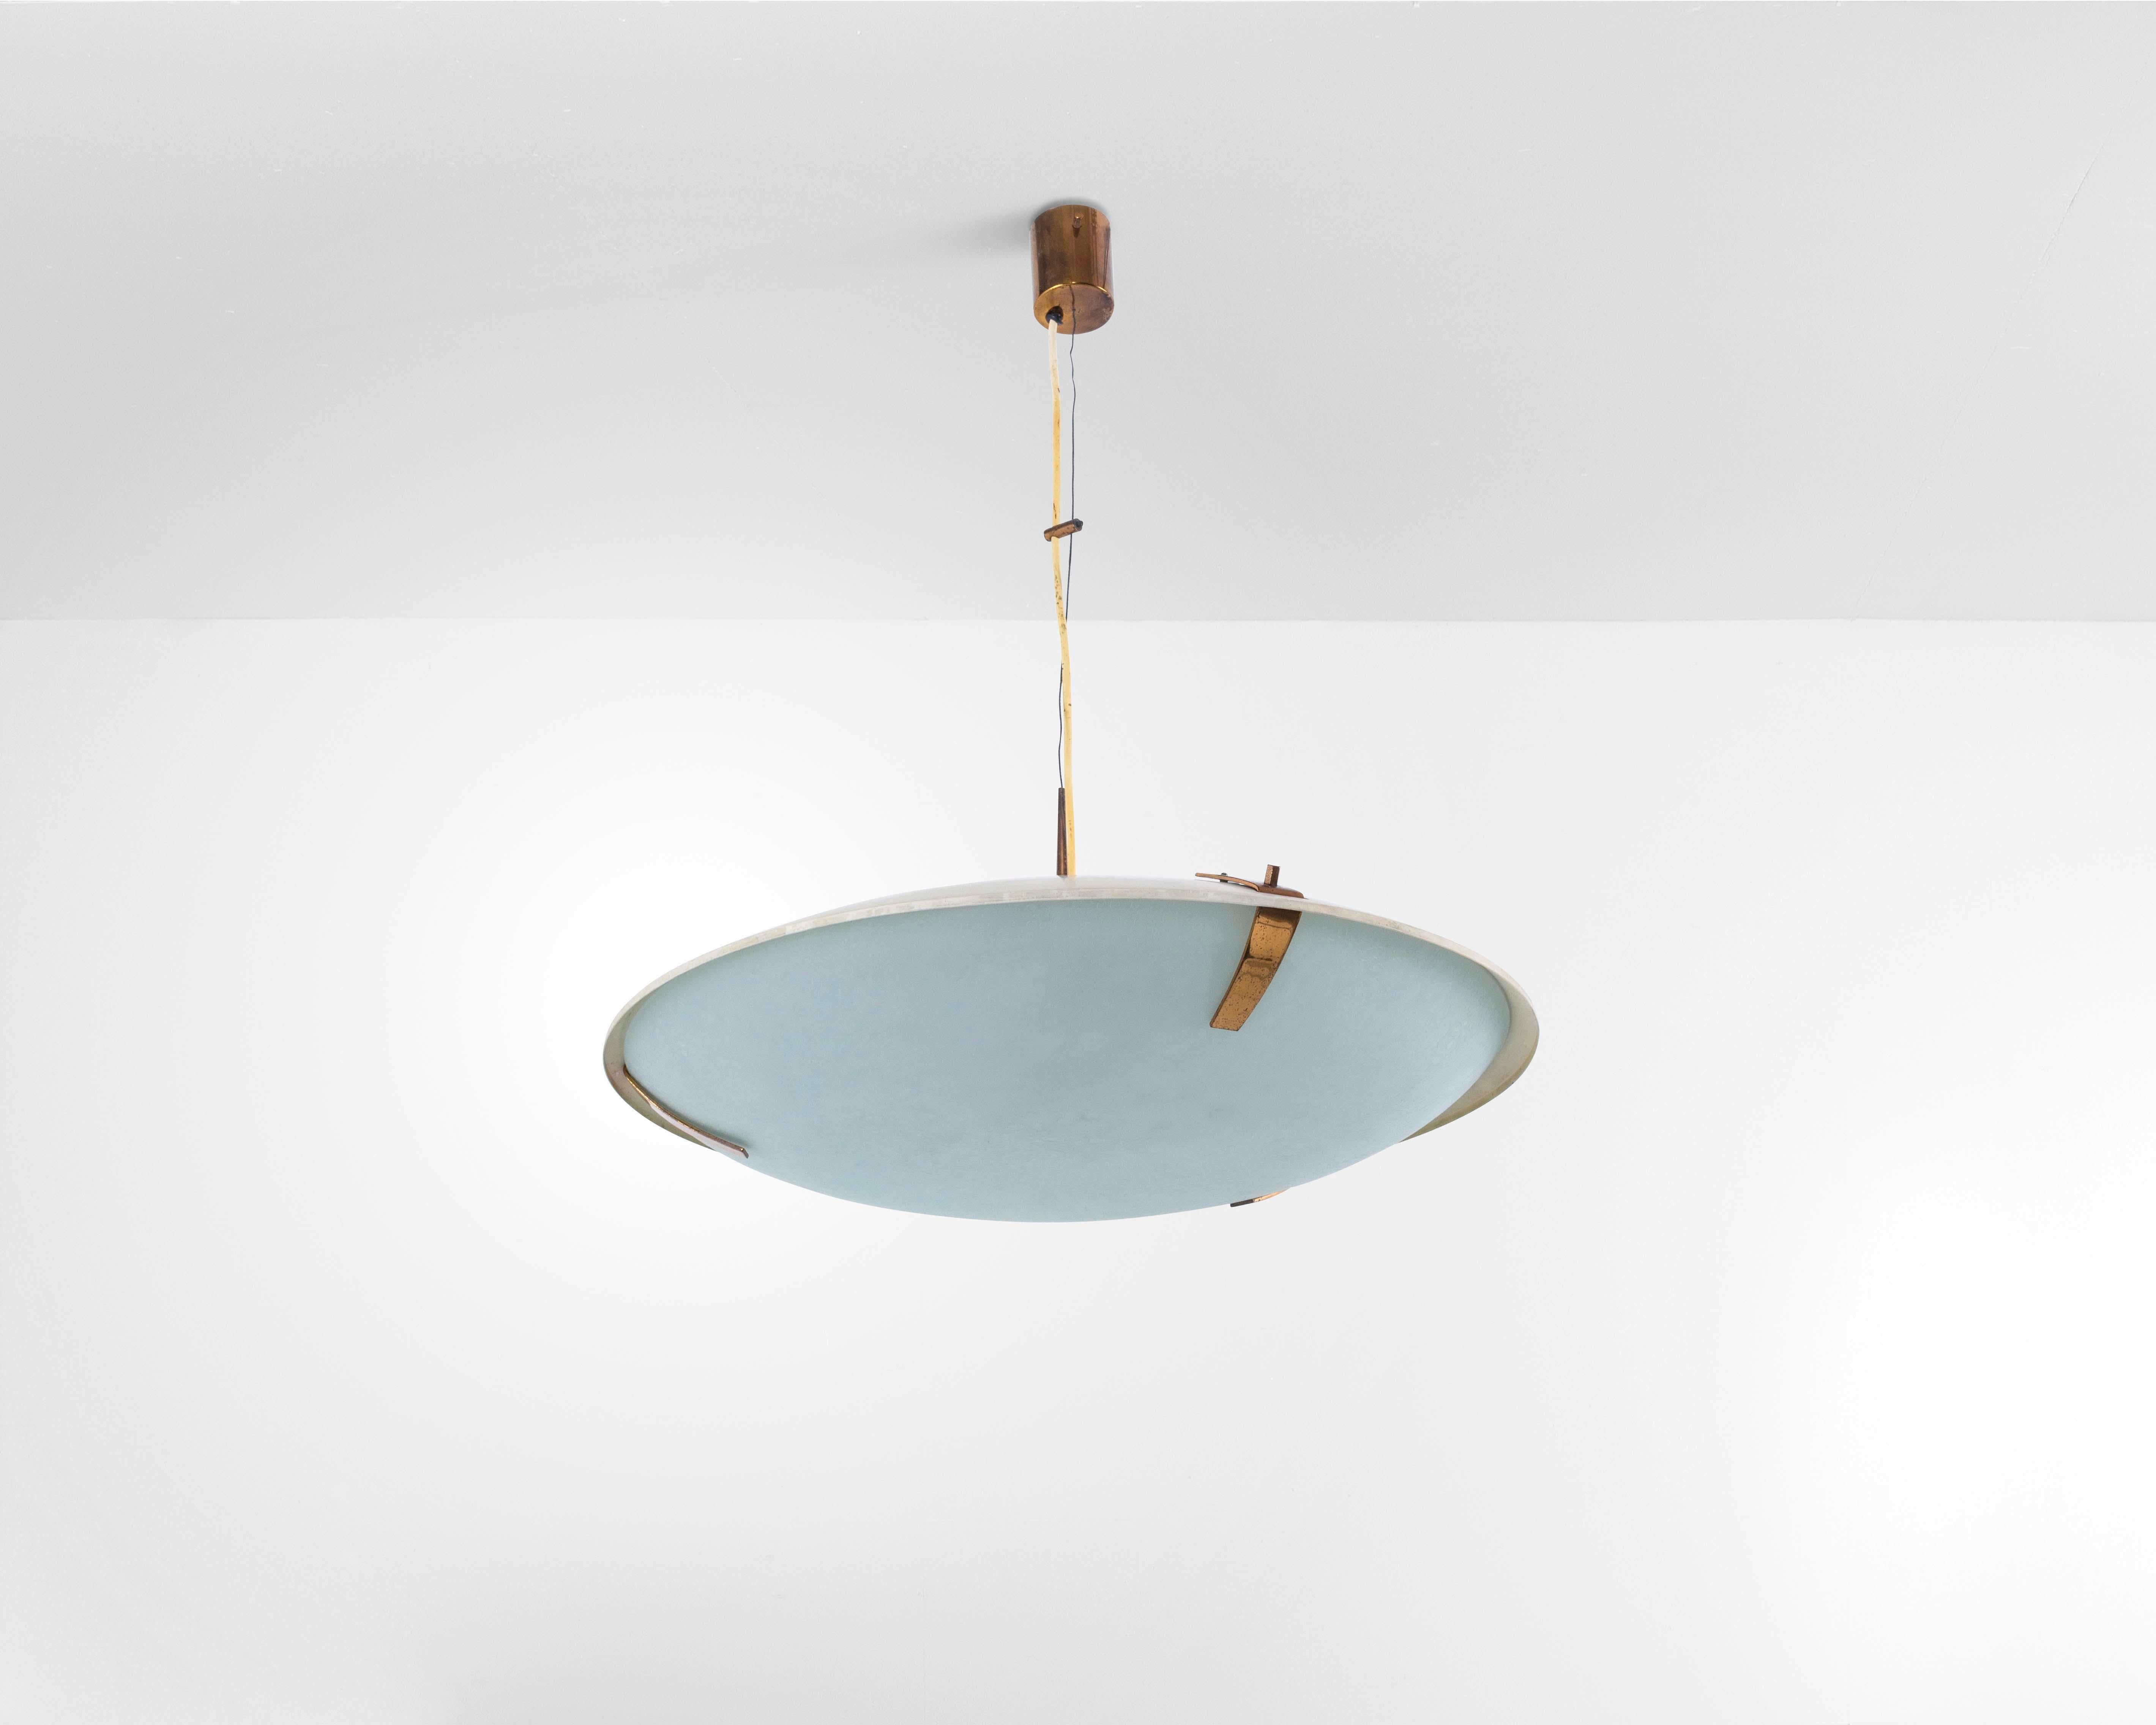 This suspension lamp created by Stilnovo is a rare model that is very decorative and impactful, with a captivating disc shape and capable of having an aesthetic value to highlight the elements in the room by bringing curved and gentle lines. The